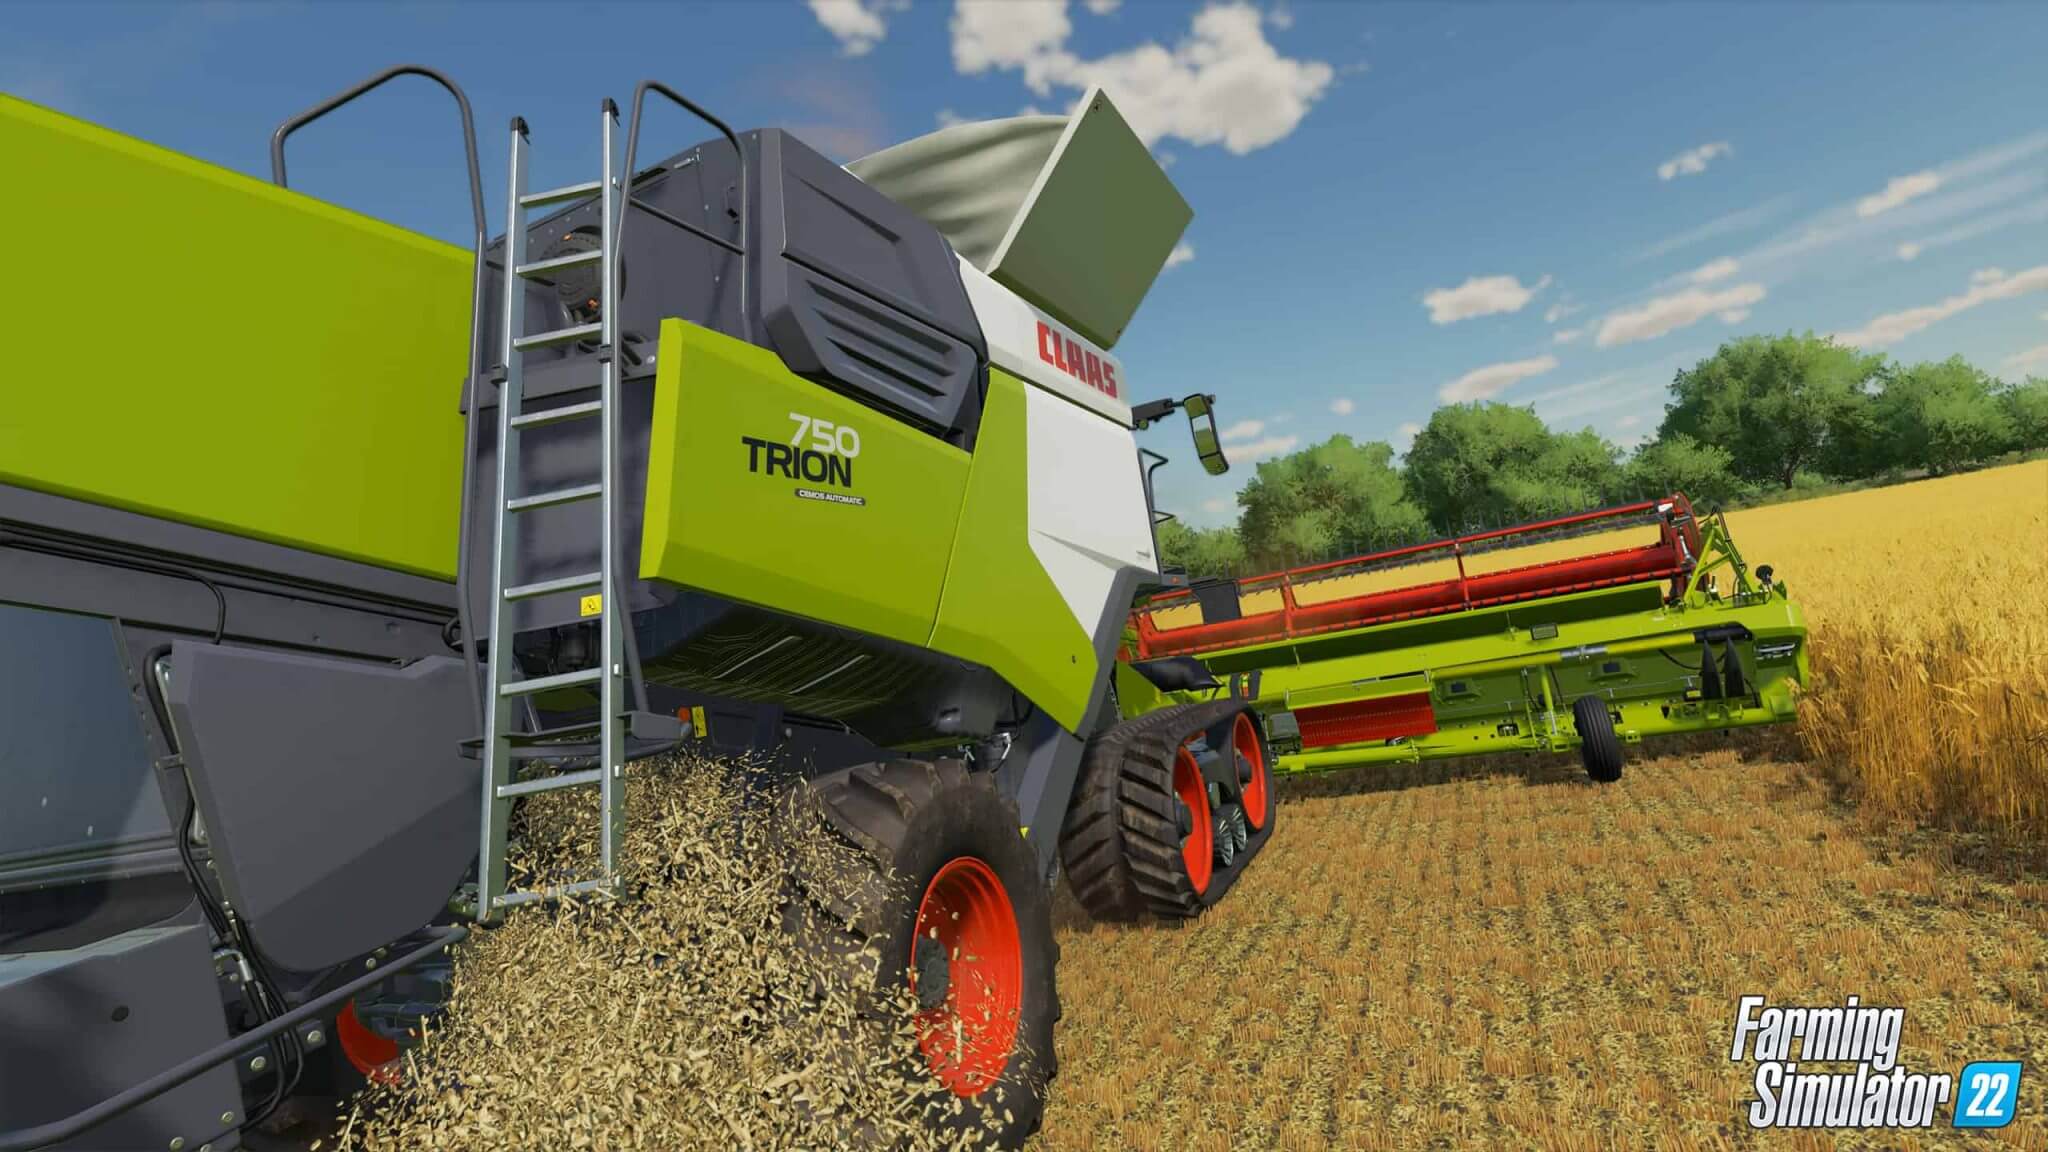 The New Claas Trion In Farming Simulator 22 5887